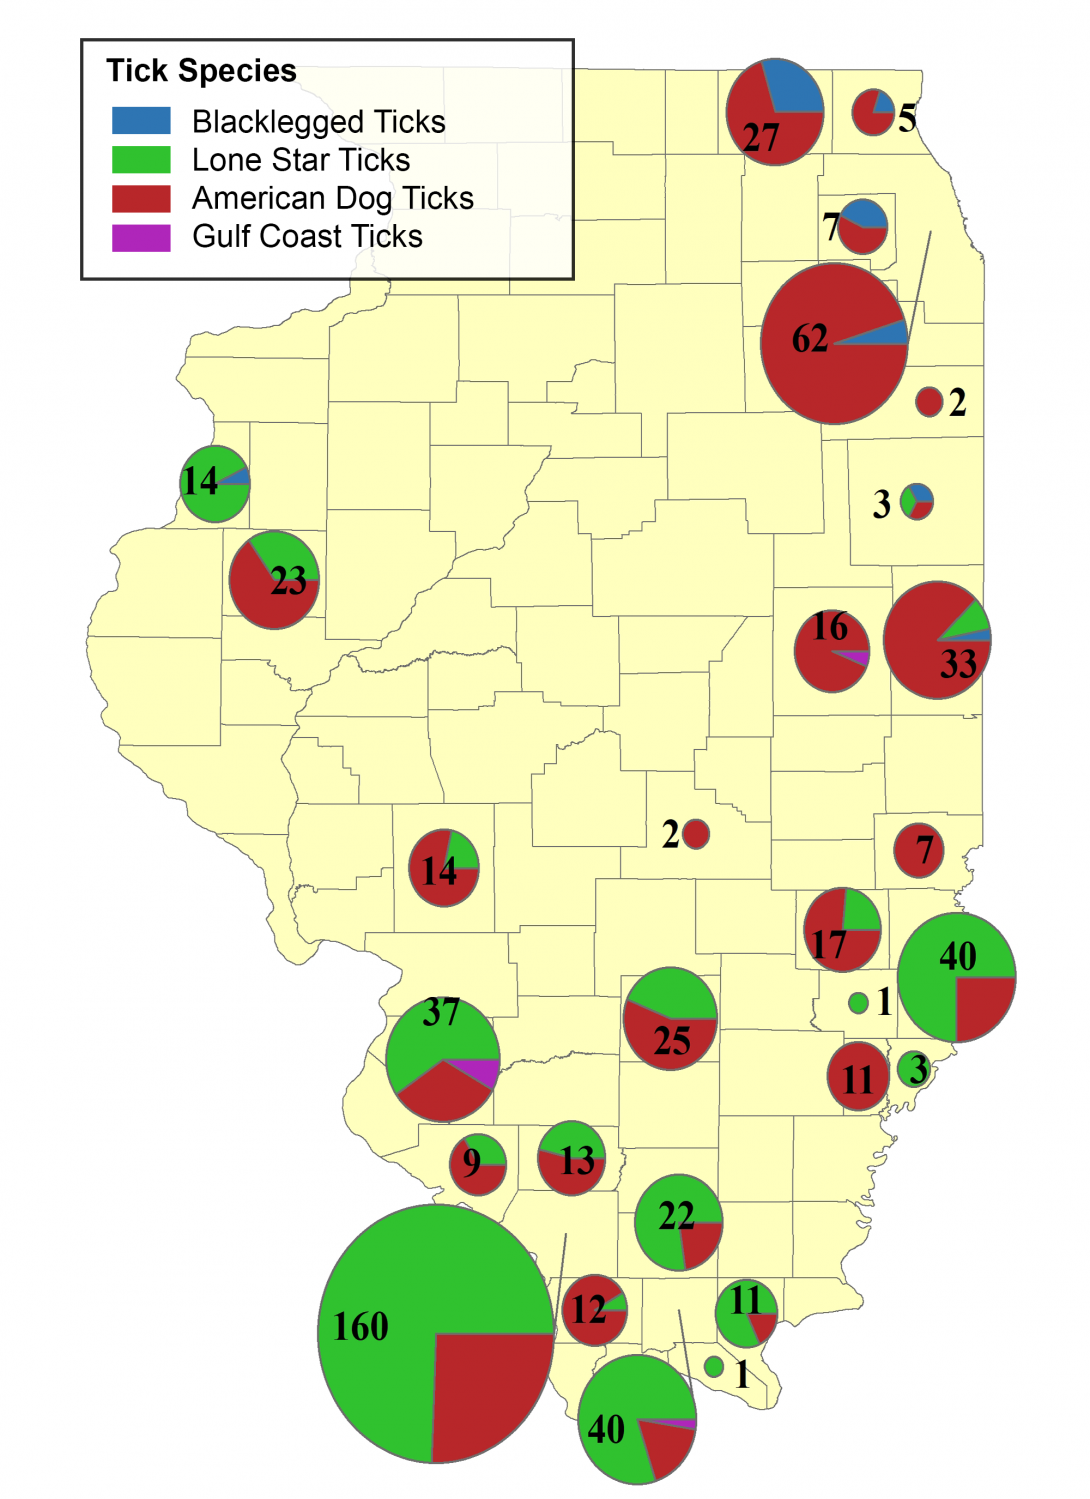 Tick Species Collected in Illinois in 2018